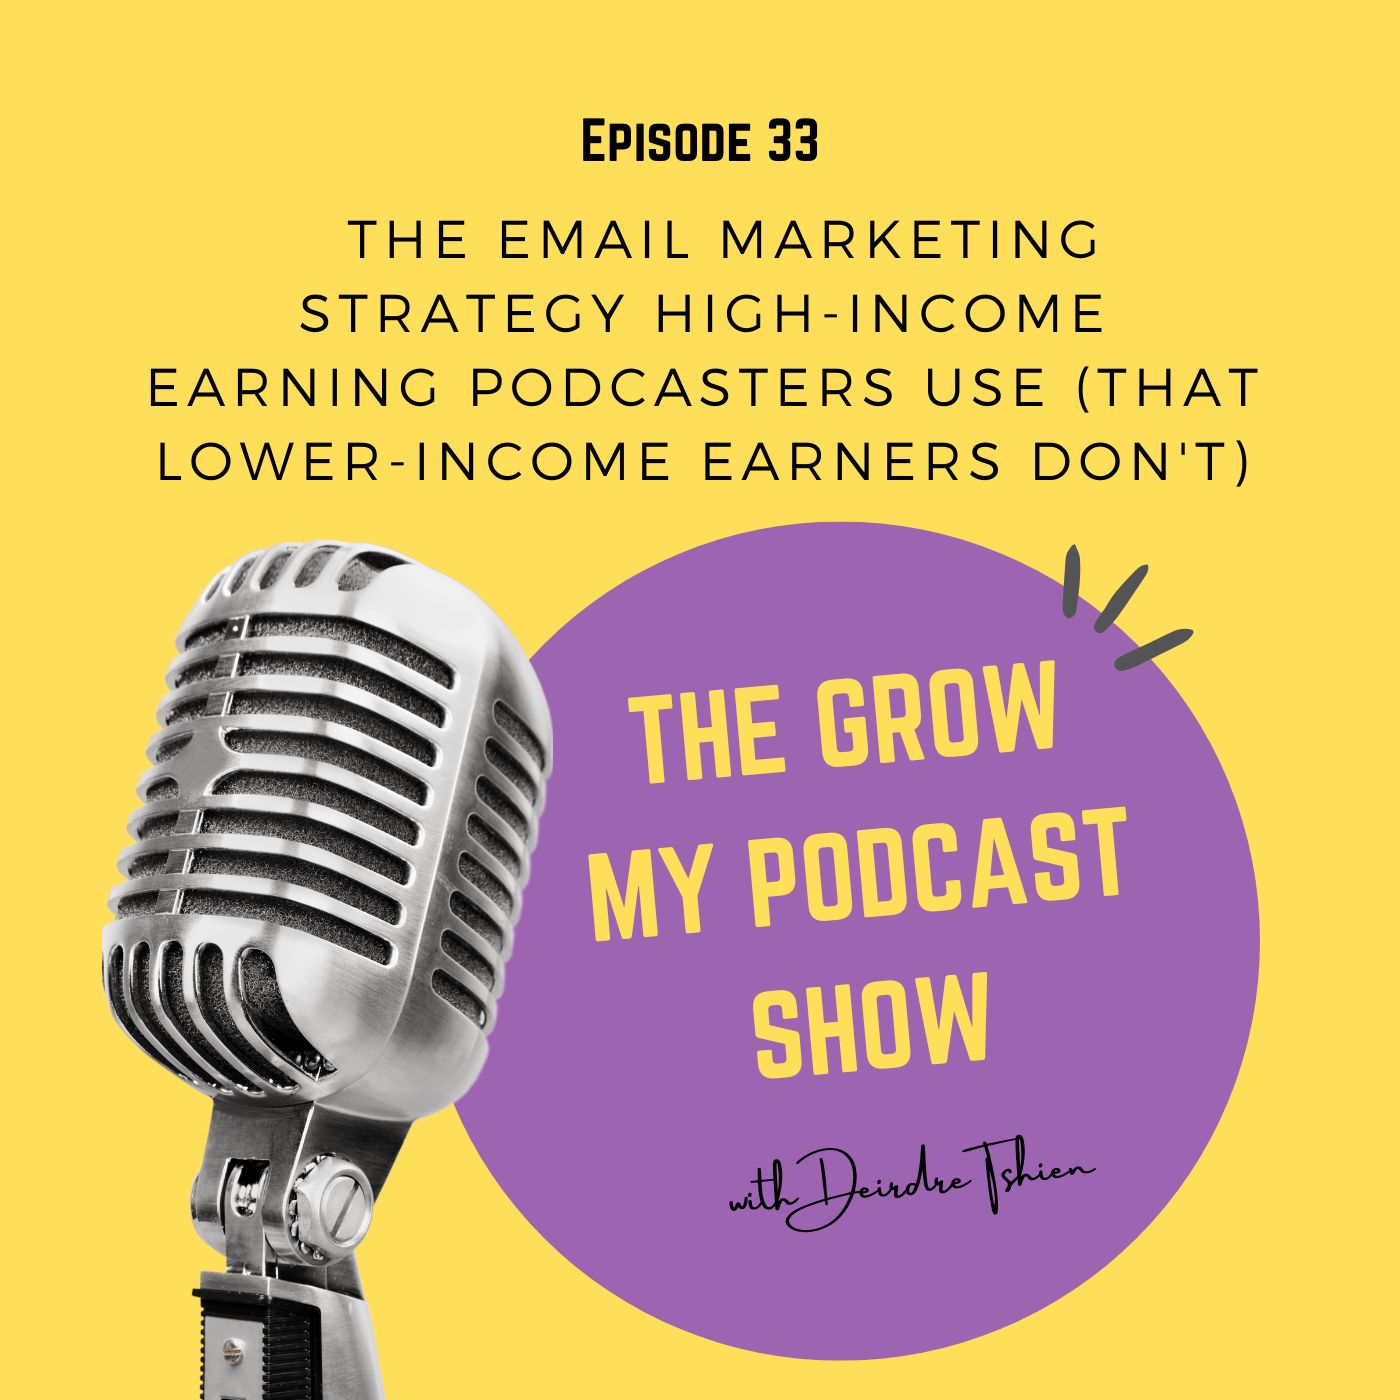 33. The Email Marketing Strategy High-Income Earning Podcasters Use (That Lower-Income Earners Don't) Image